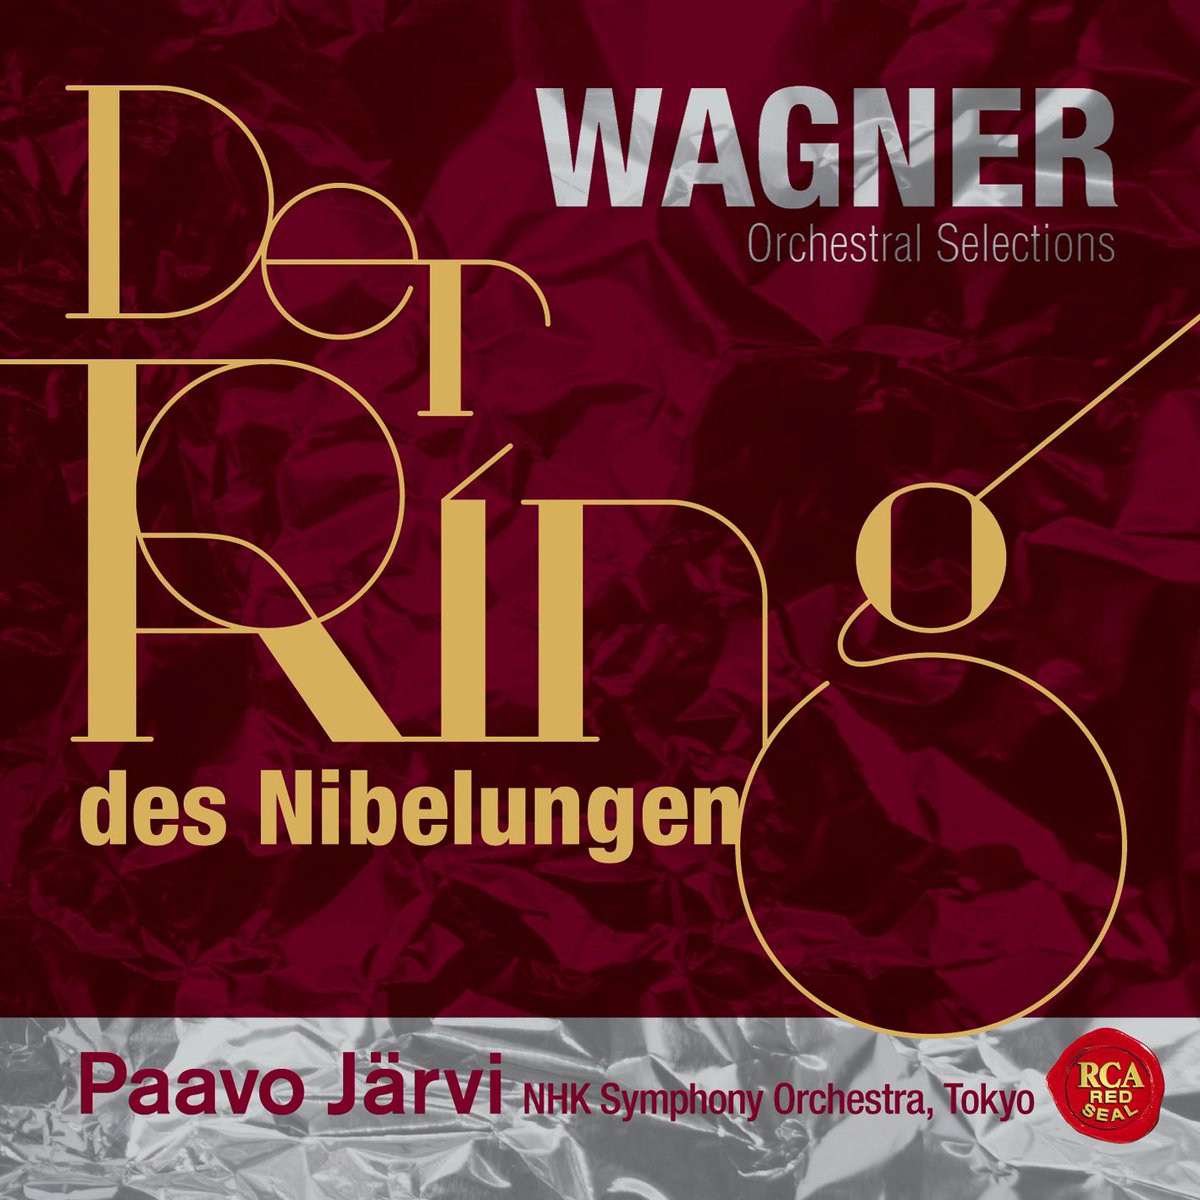 Have you heard this one?
@NHKSO_Tokyo #wagner #ringcycle #paavojarvi @sonyclassicaljp @SonyClassical @SonyClassicalUK